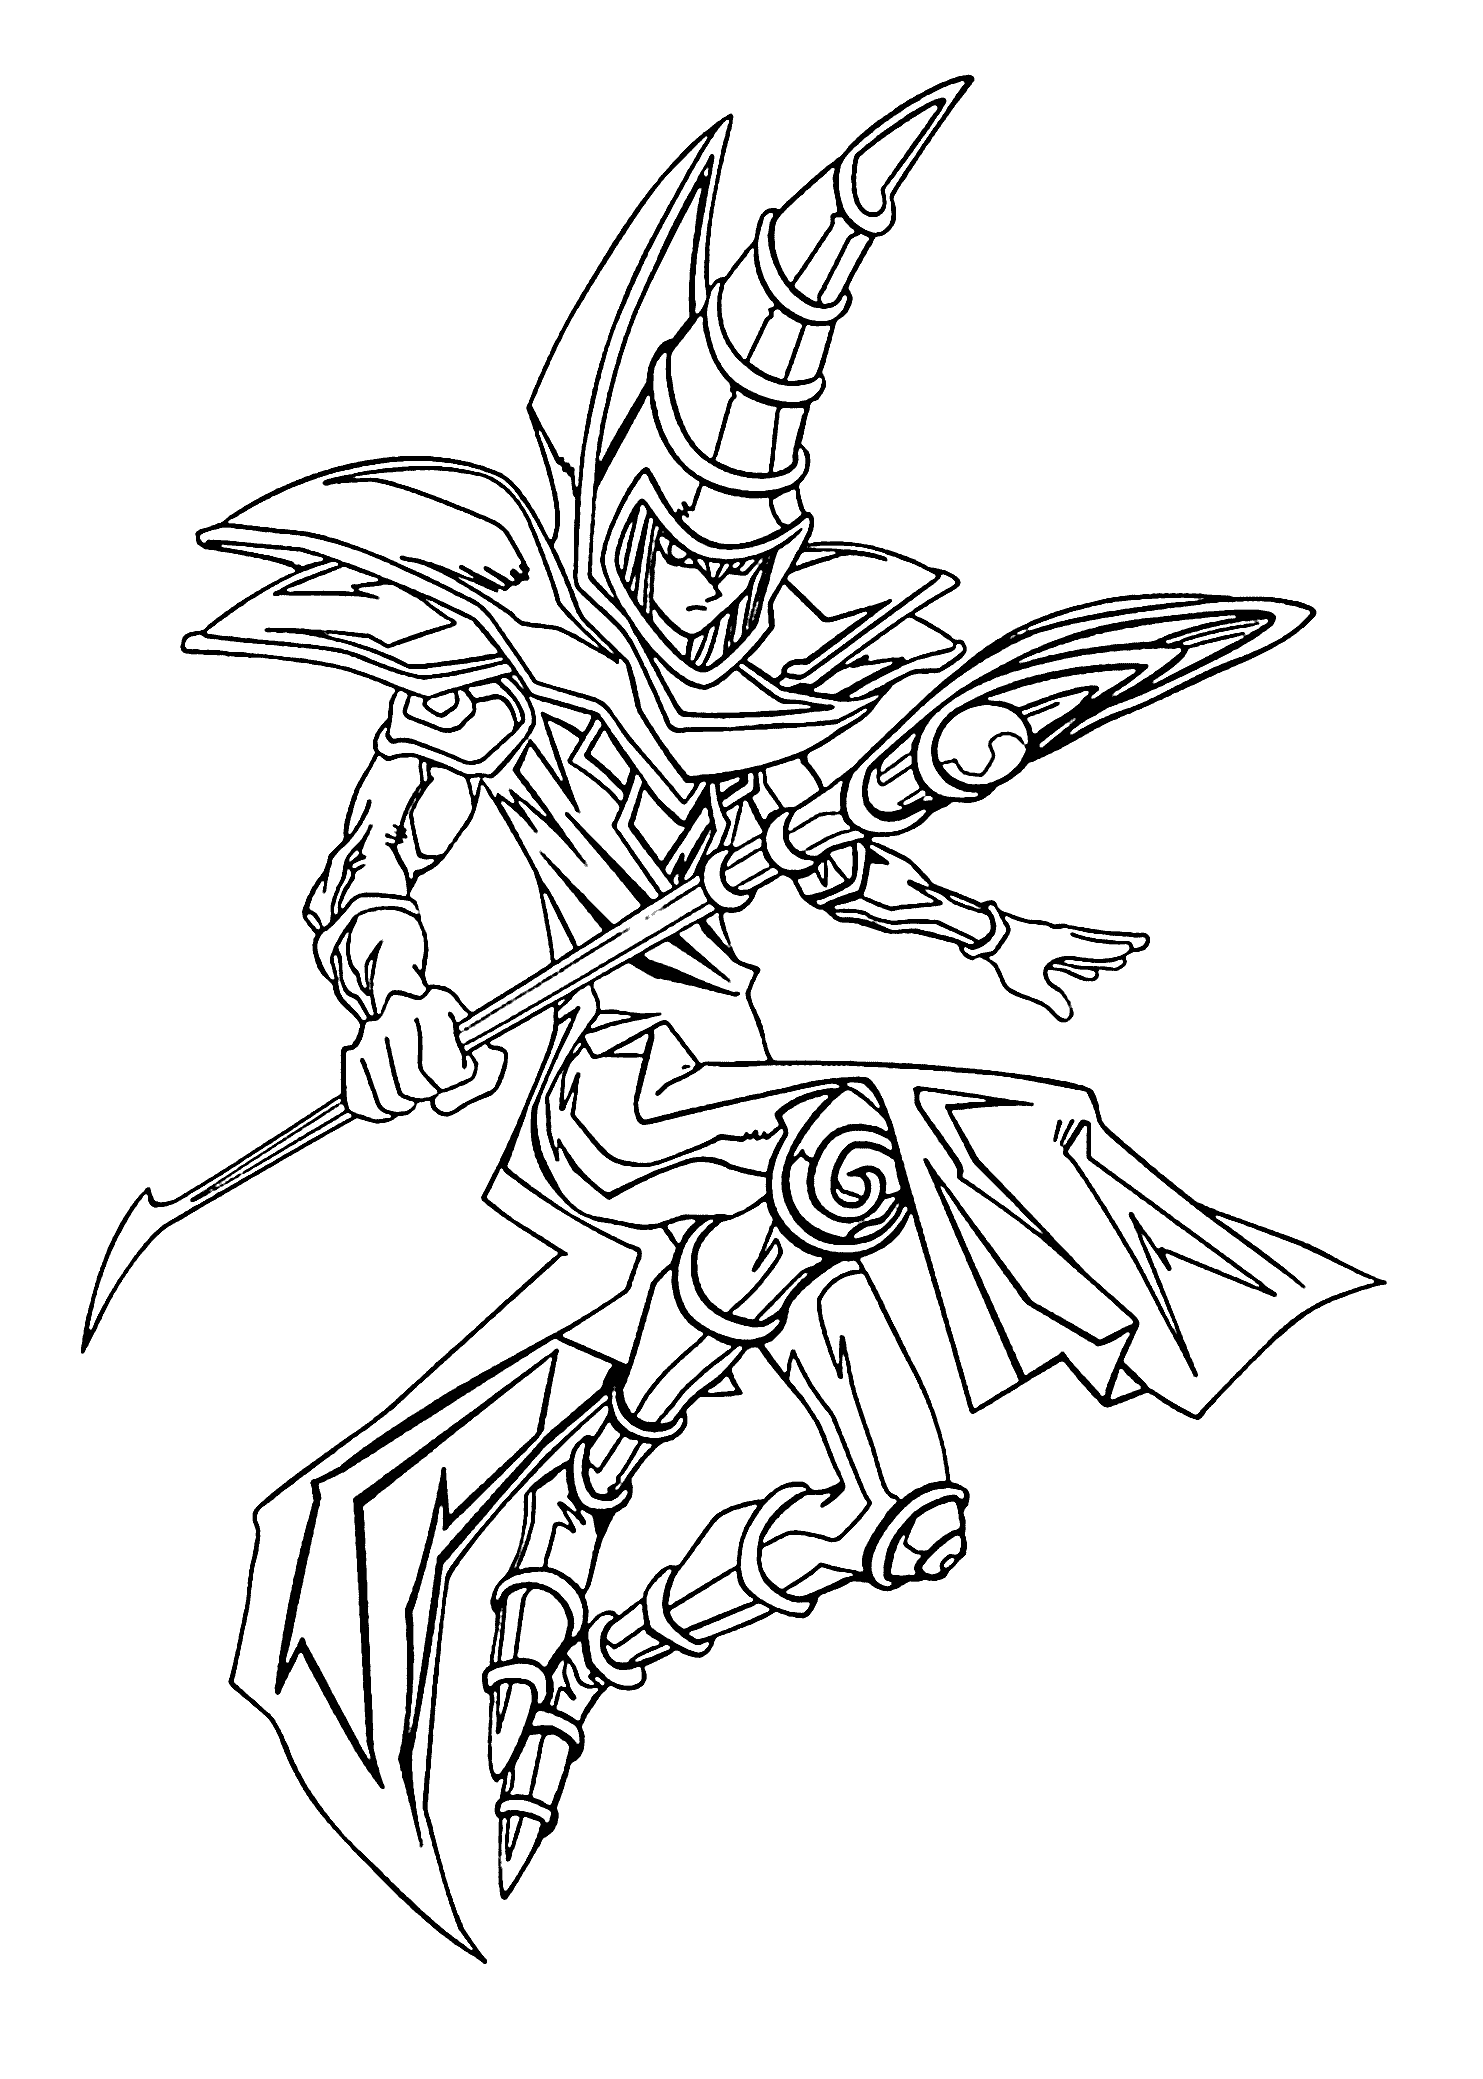 yu gi oh coloring pages free printable yugioh coloring pages for kids pages gi oh yu coloring 